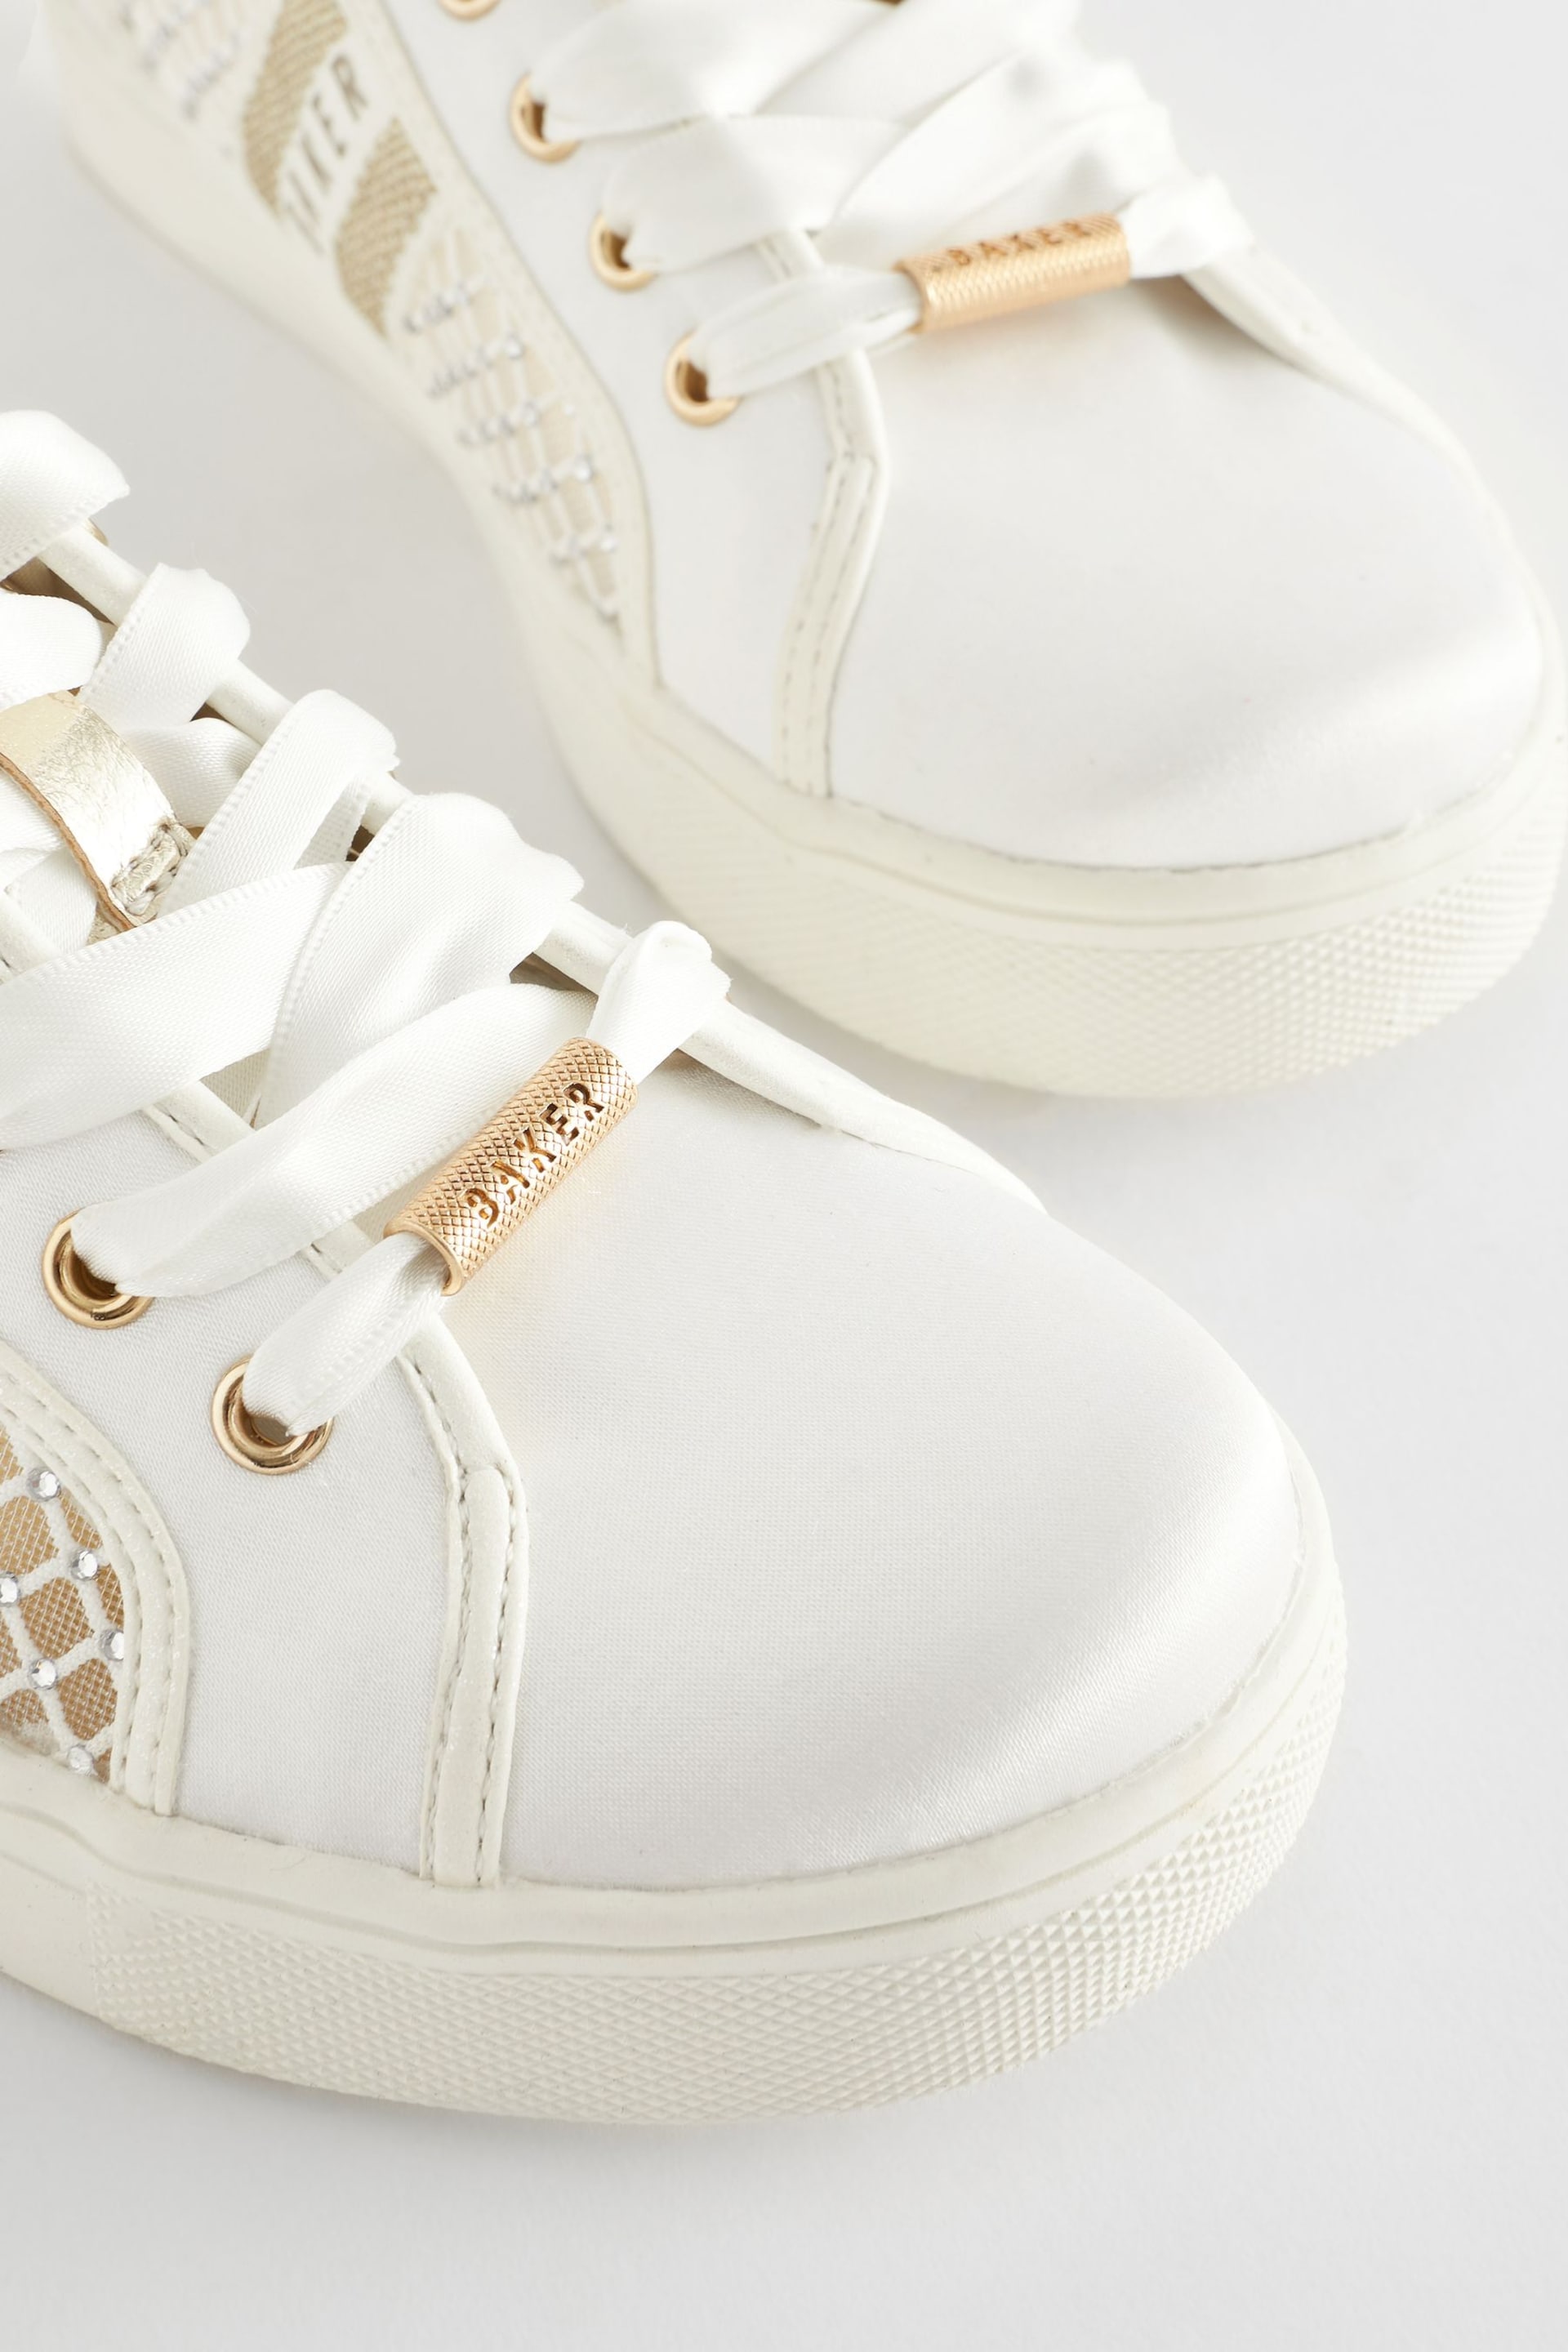 Baker by Ted Baker Girls Diamanté Lace Up Trainers - Image 7 of 7